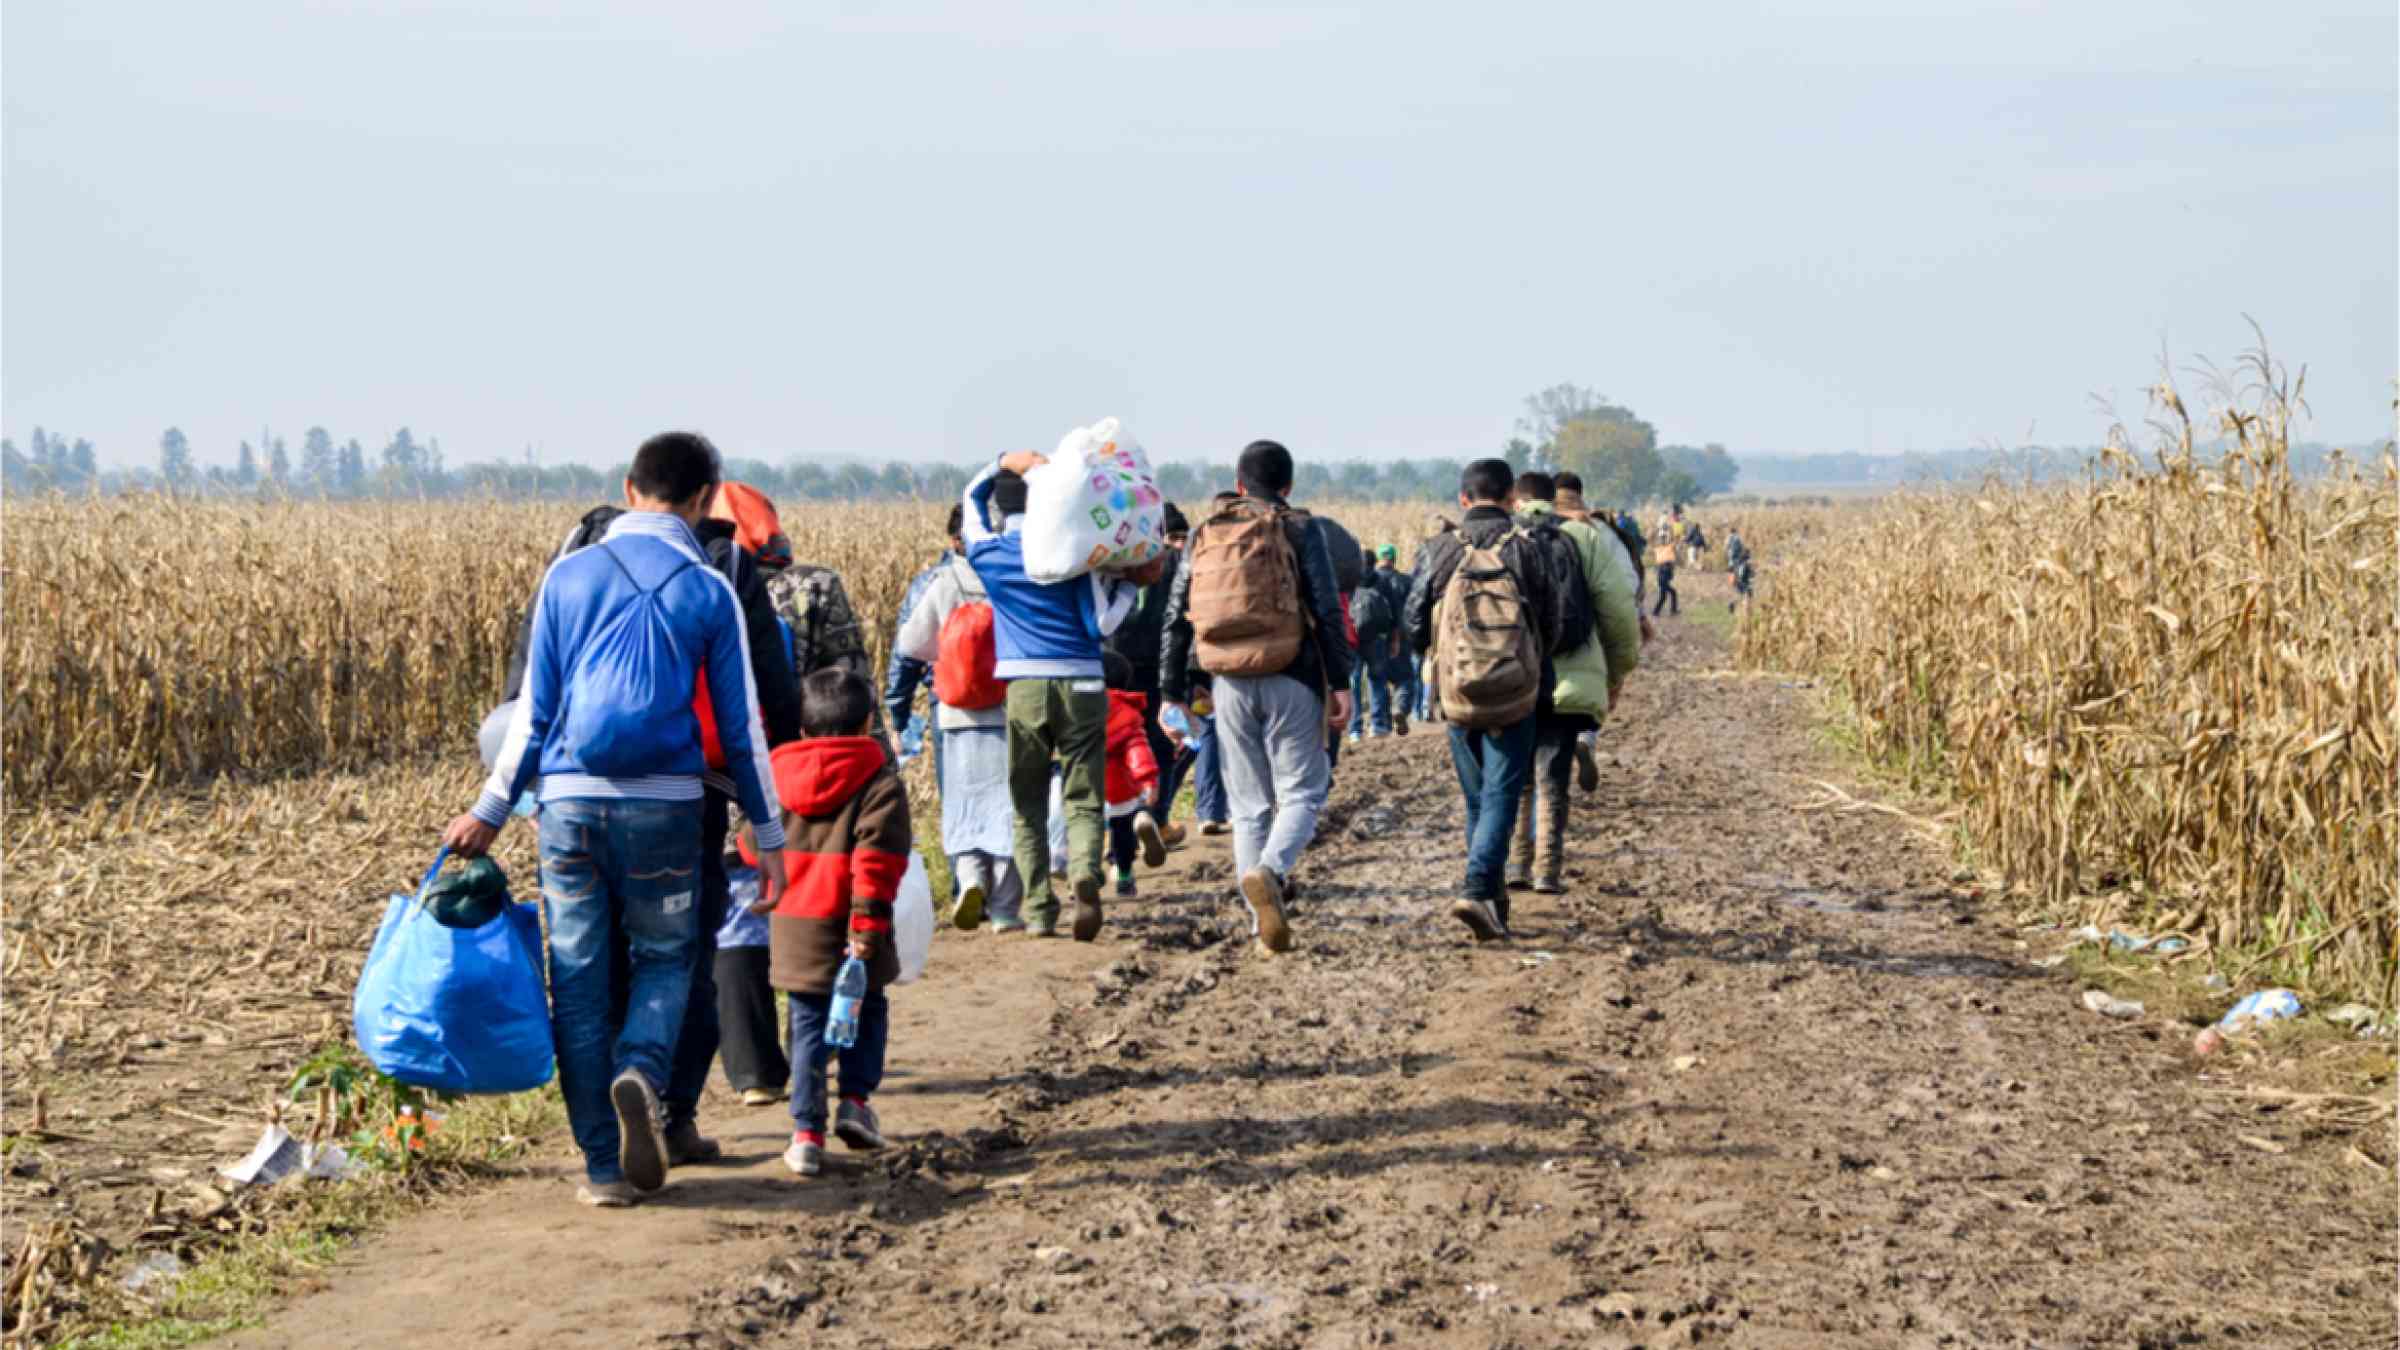 This image shows a group of refugees walking in a cornfield. They are Syrian refugees who are crossing the border to reach the EU.